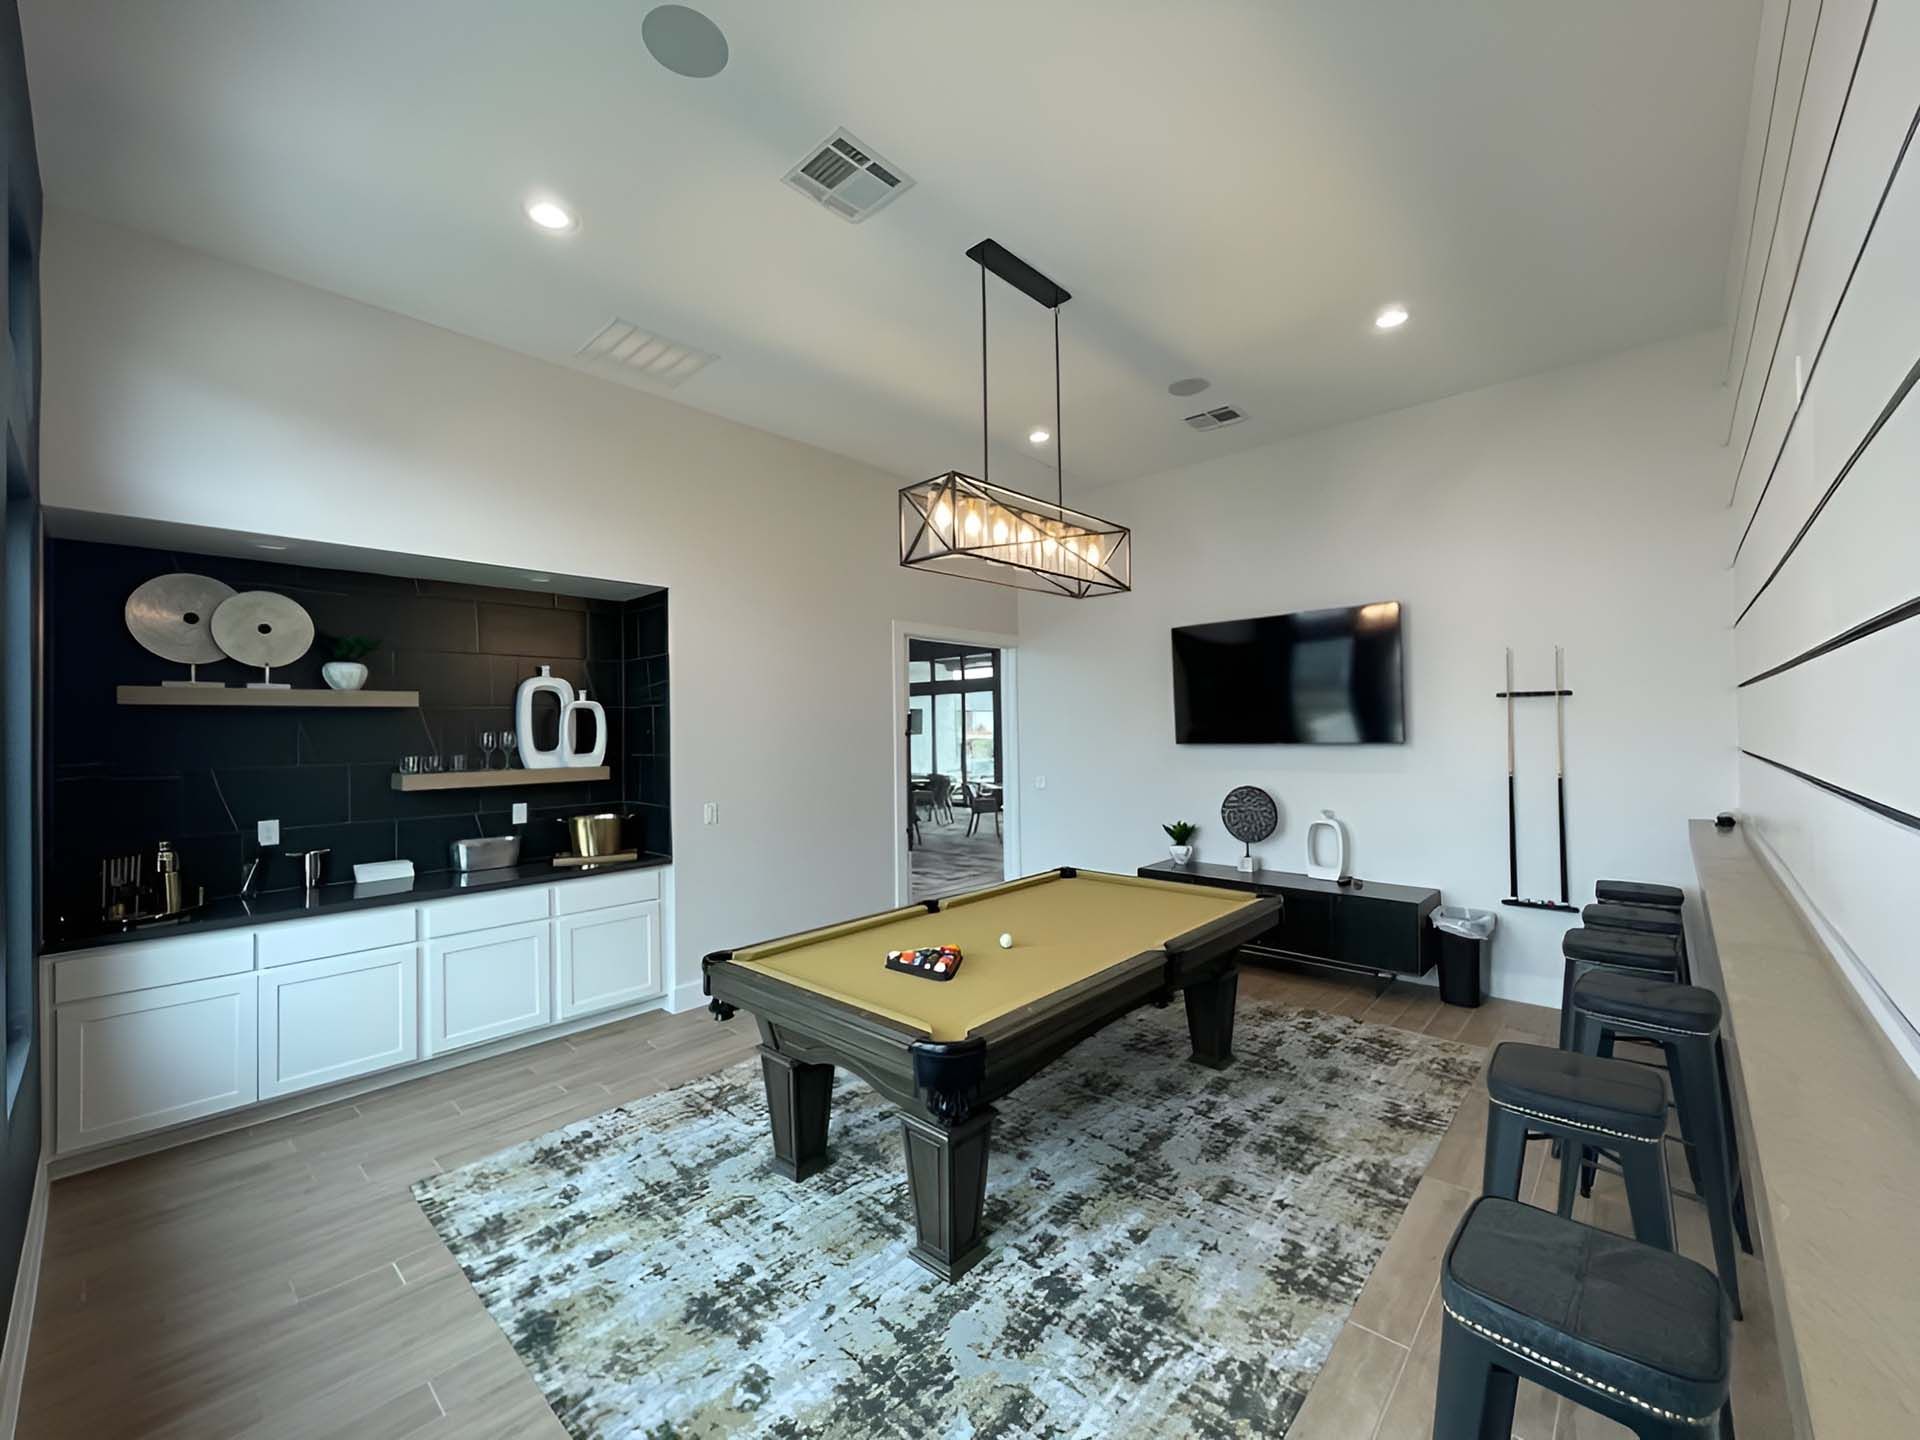 Game room with a pool table